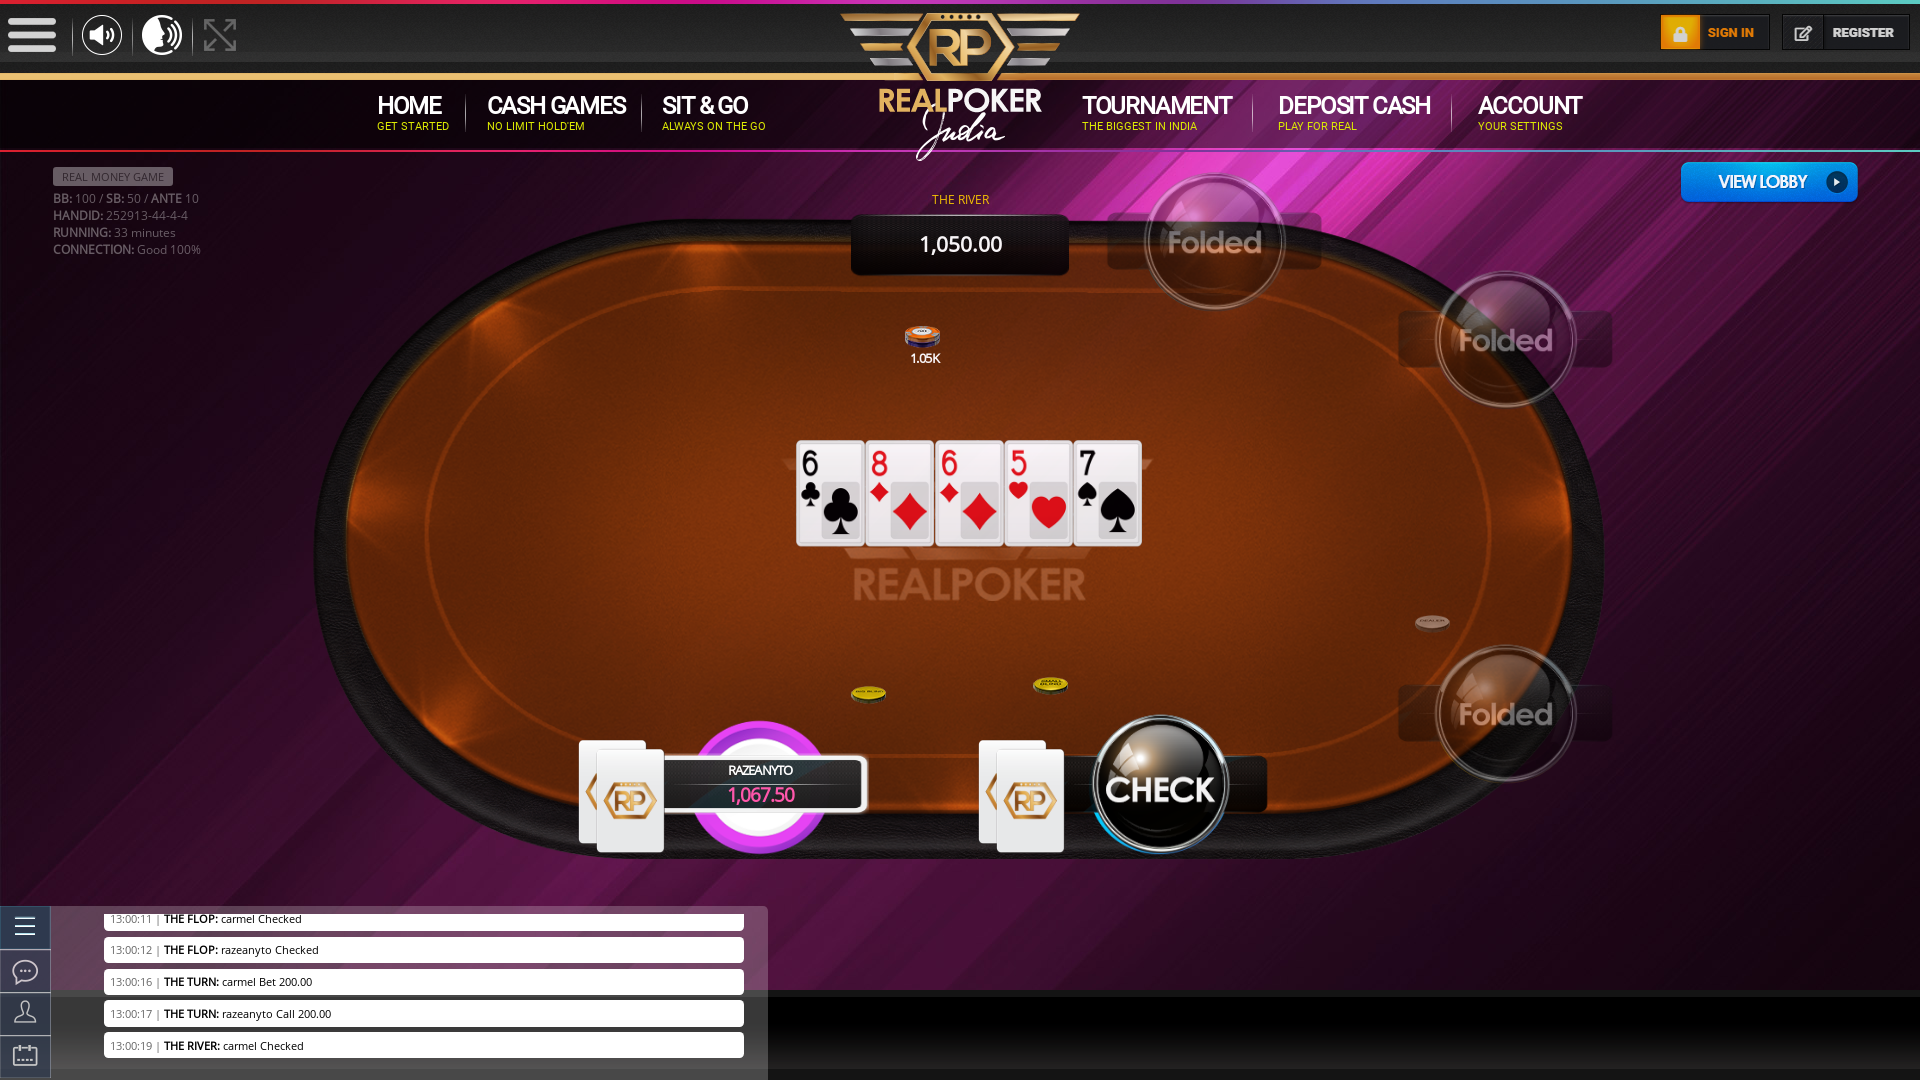 Real poker 10 player table in the 32nd minute